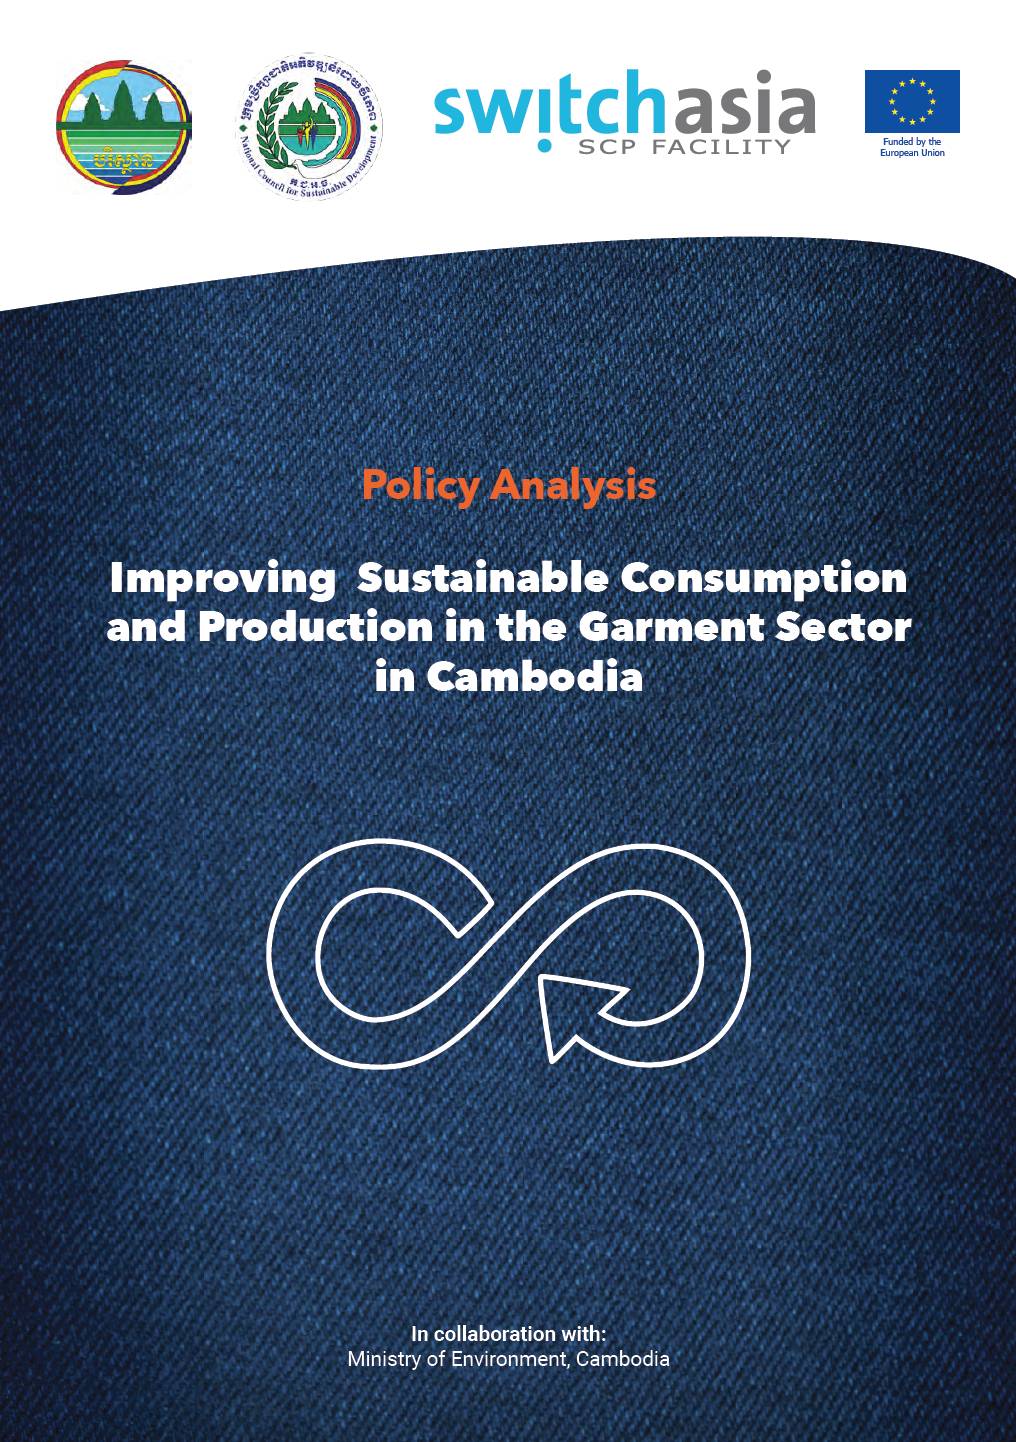 Improving Sustainable Consumption and Production in the Garment Sector in Cambodia